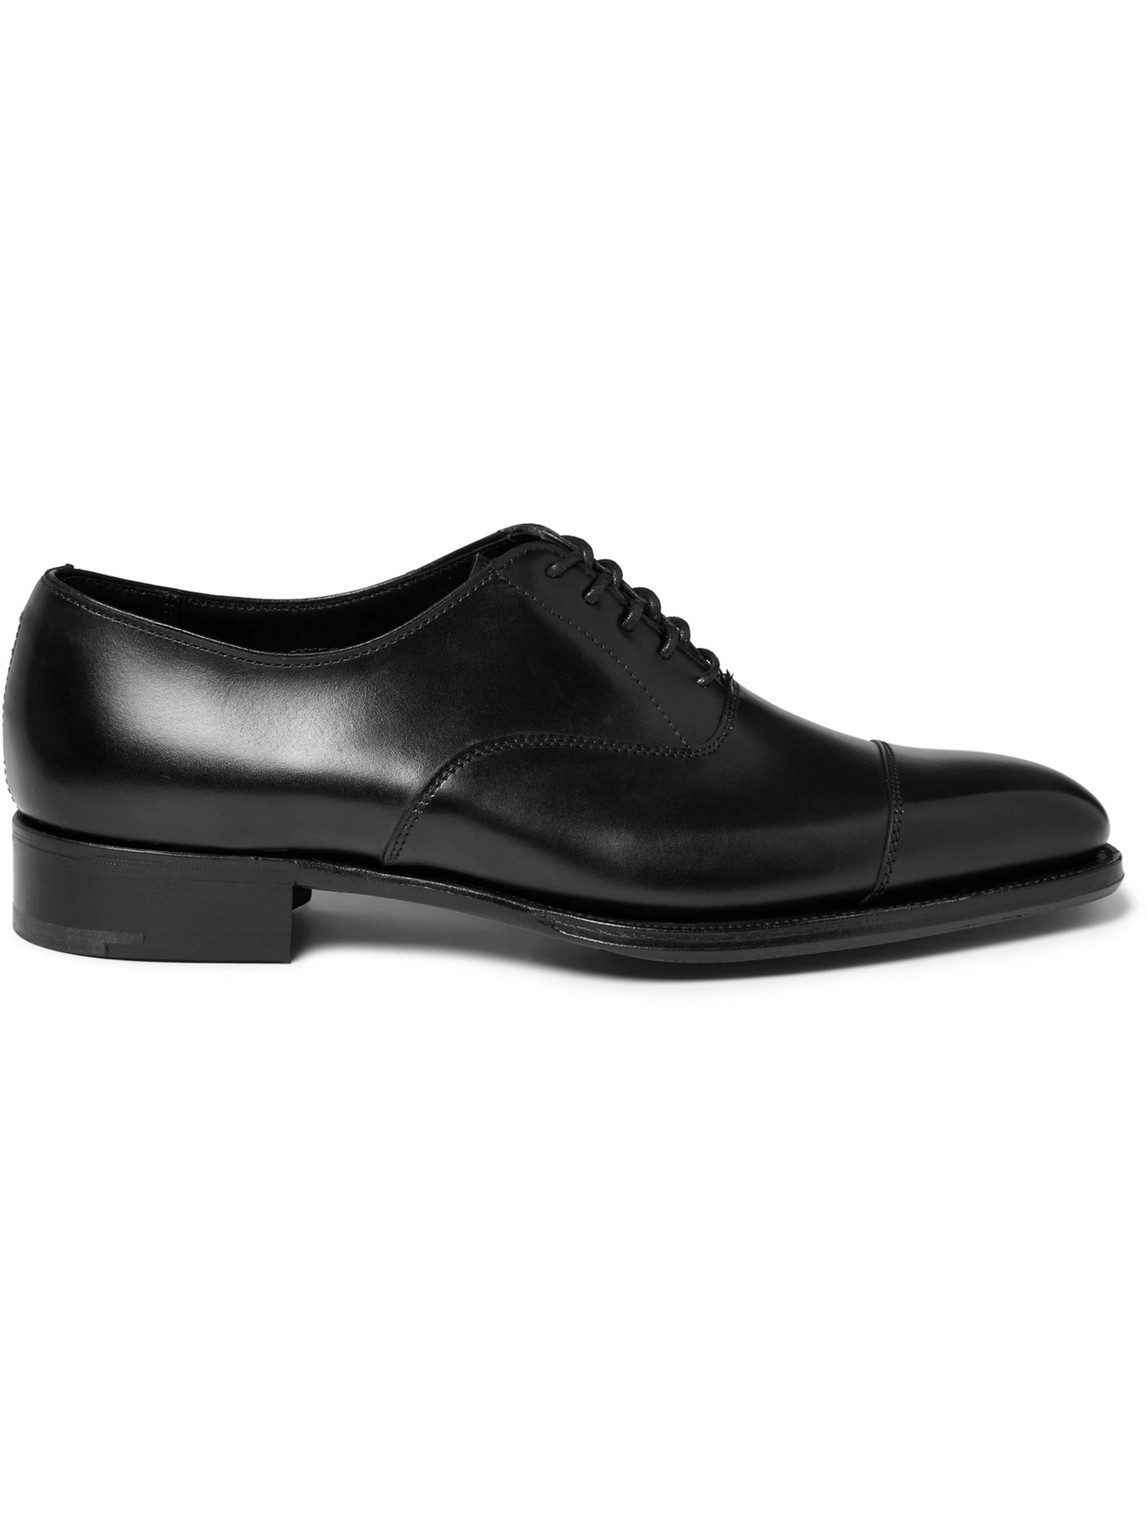 Kingsman George Cleverley Leather Oxford Shoes In Black